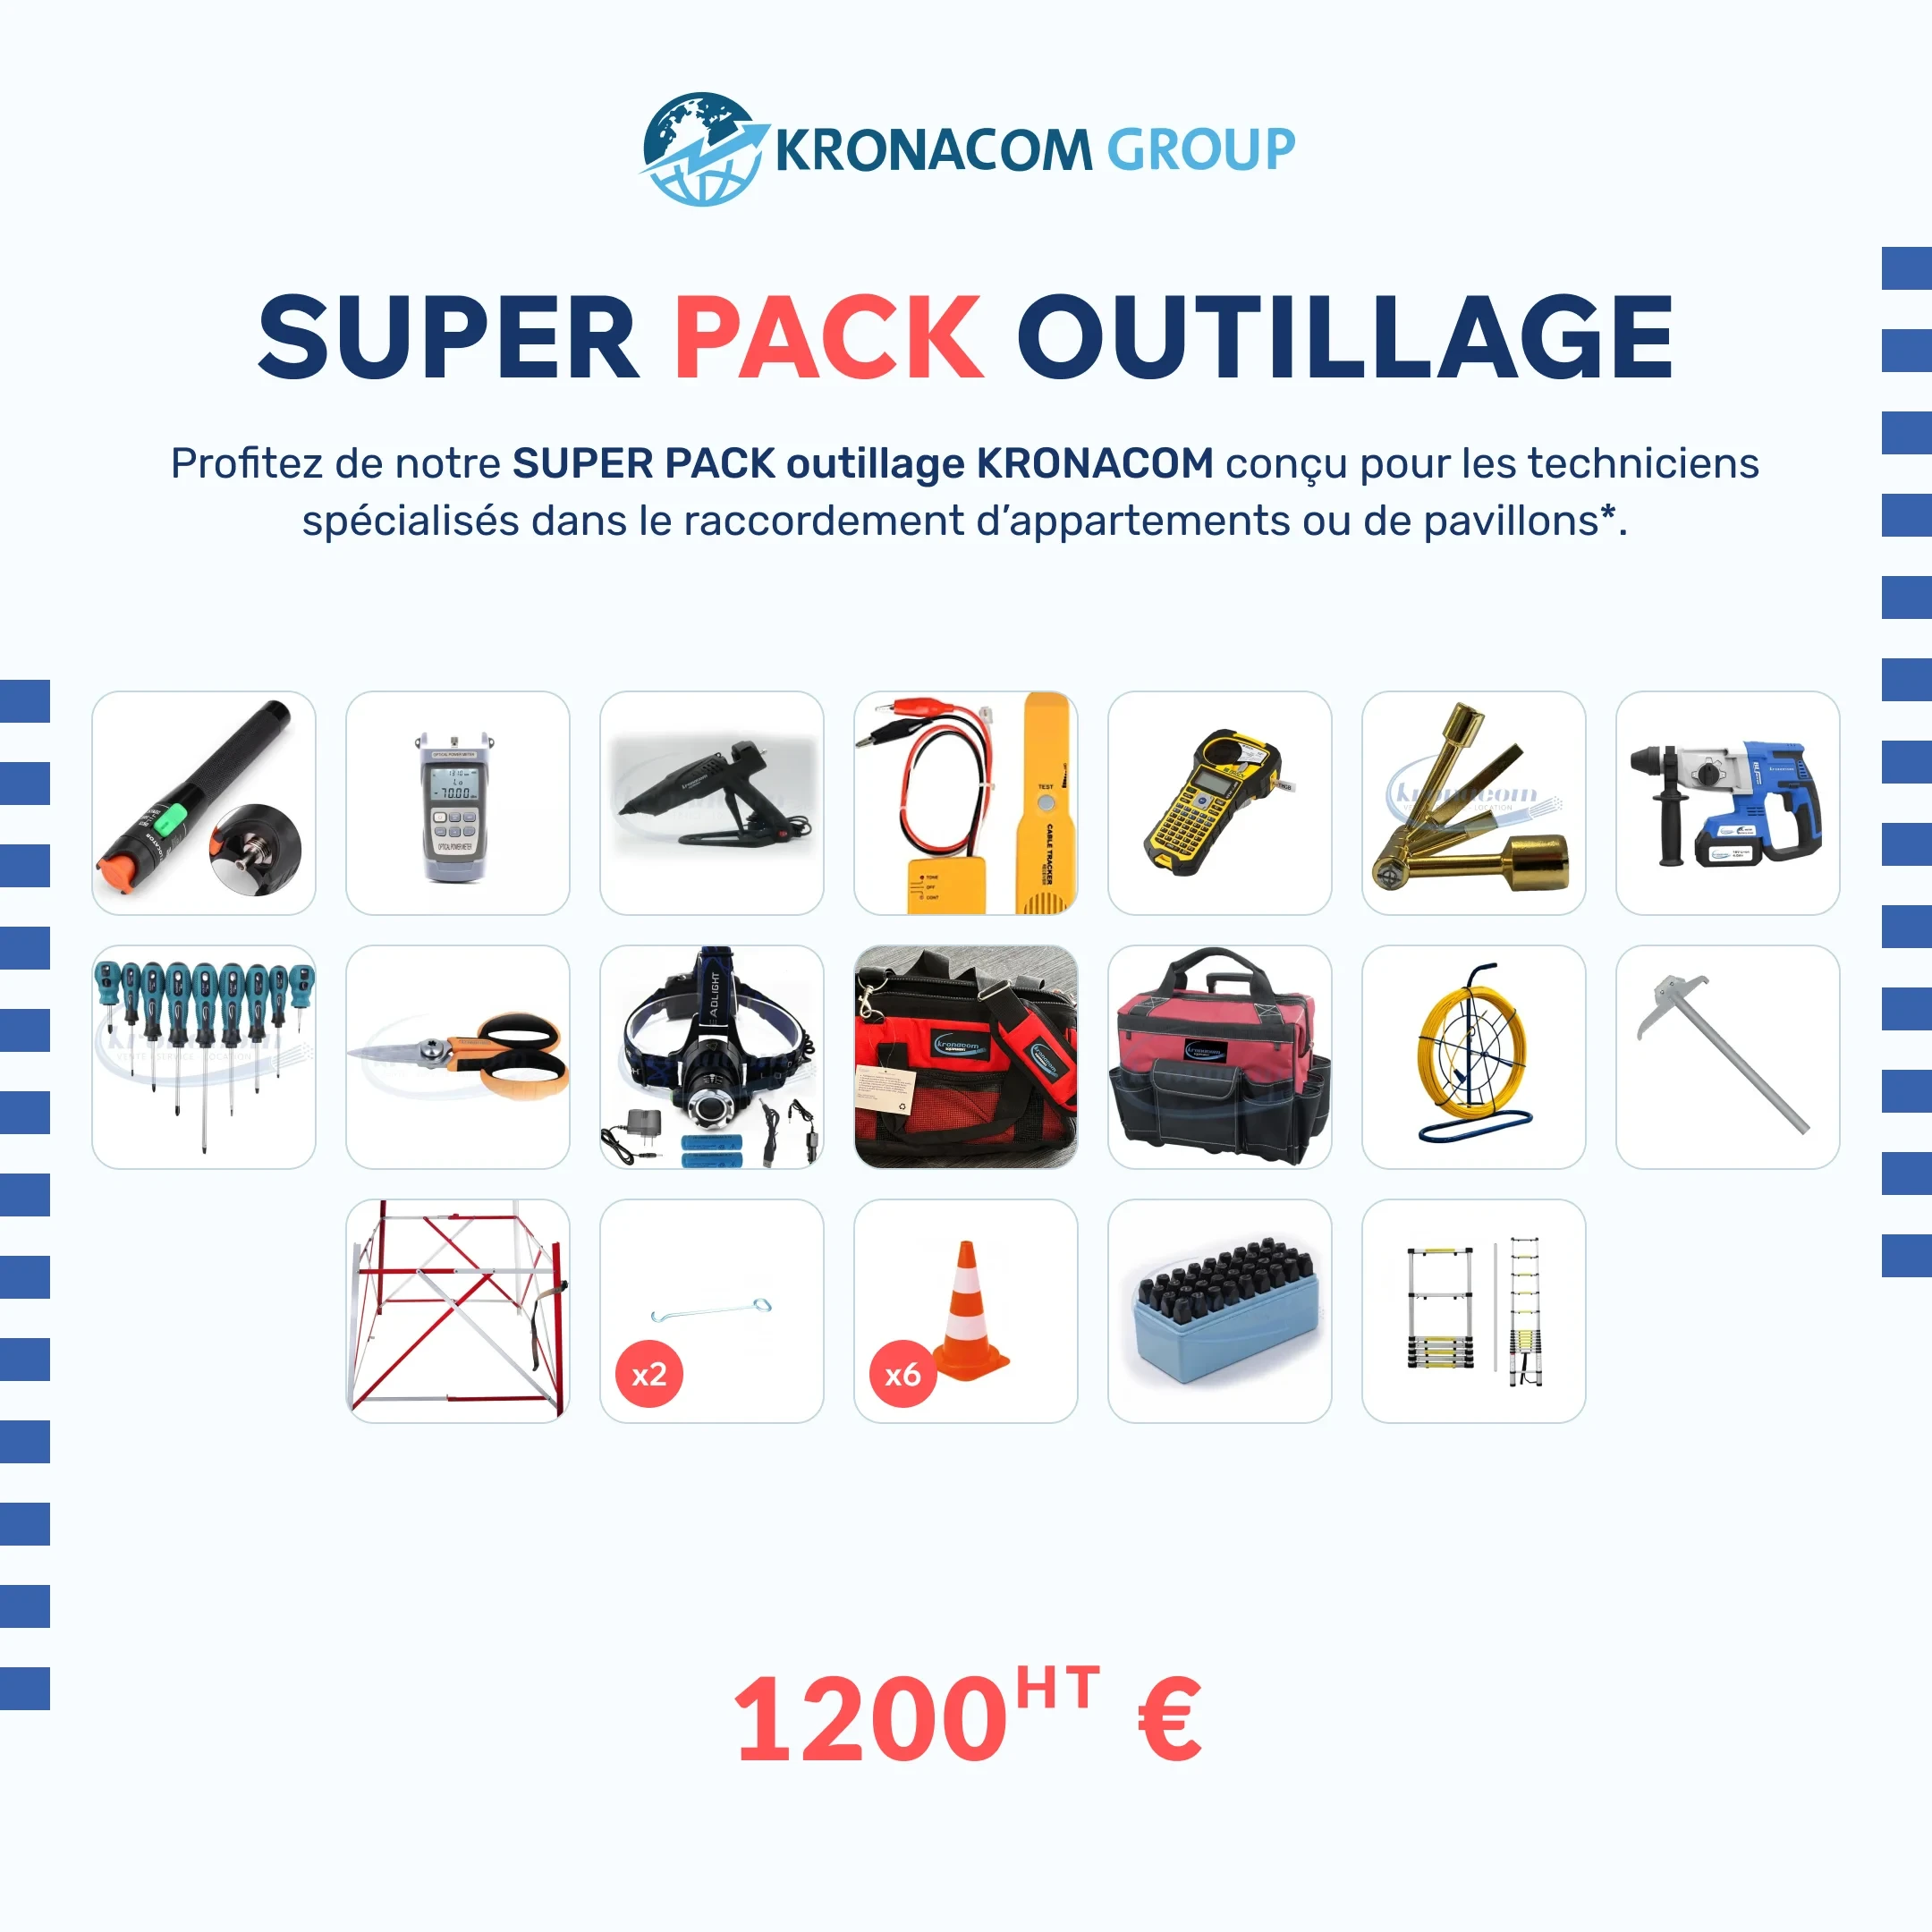 Super Pack Outillage